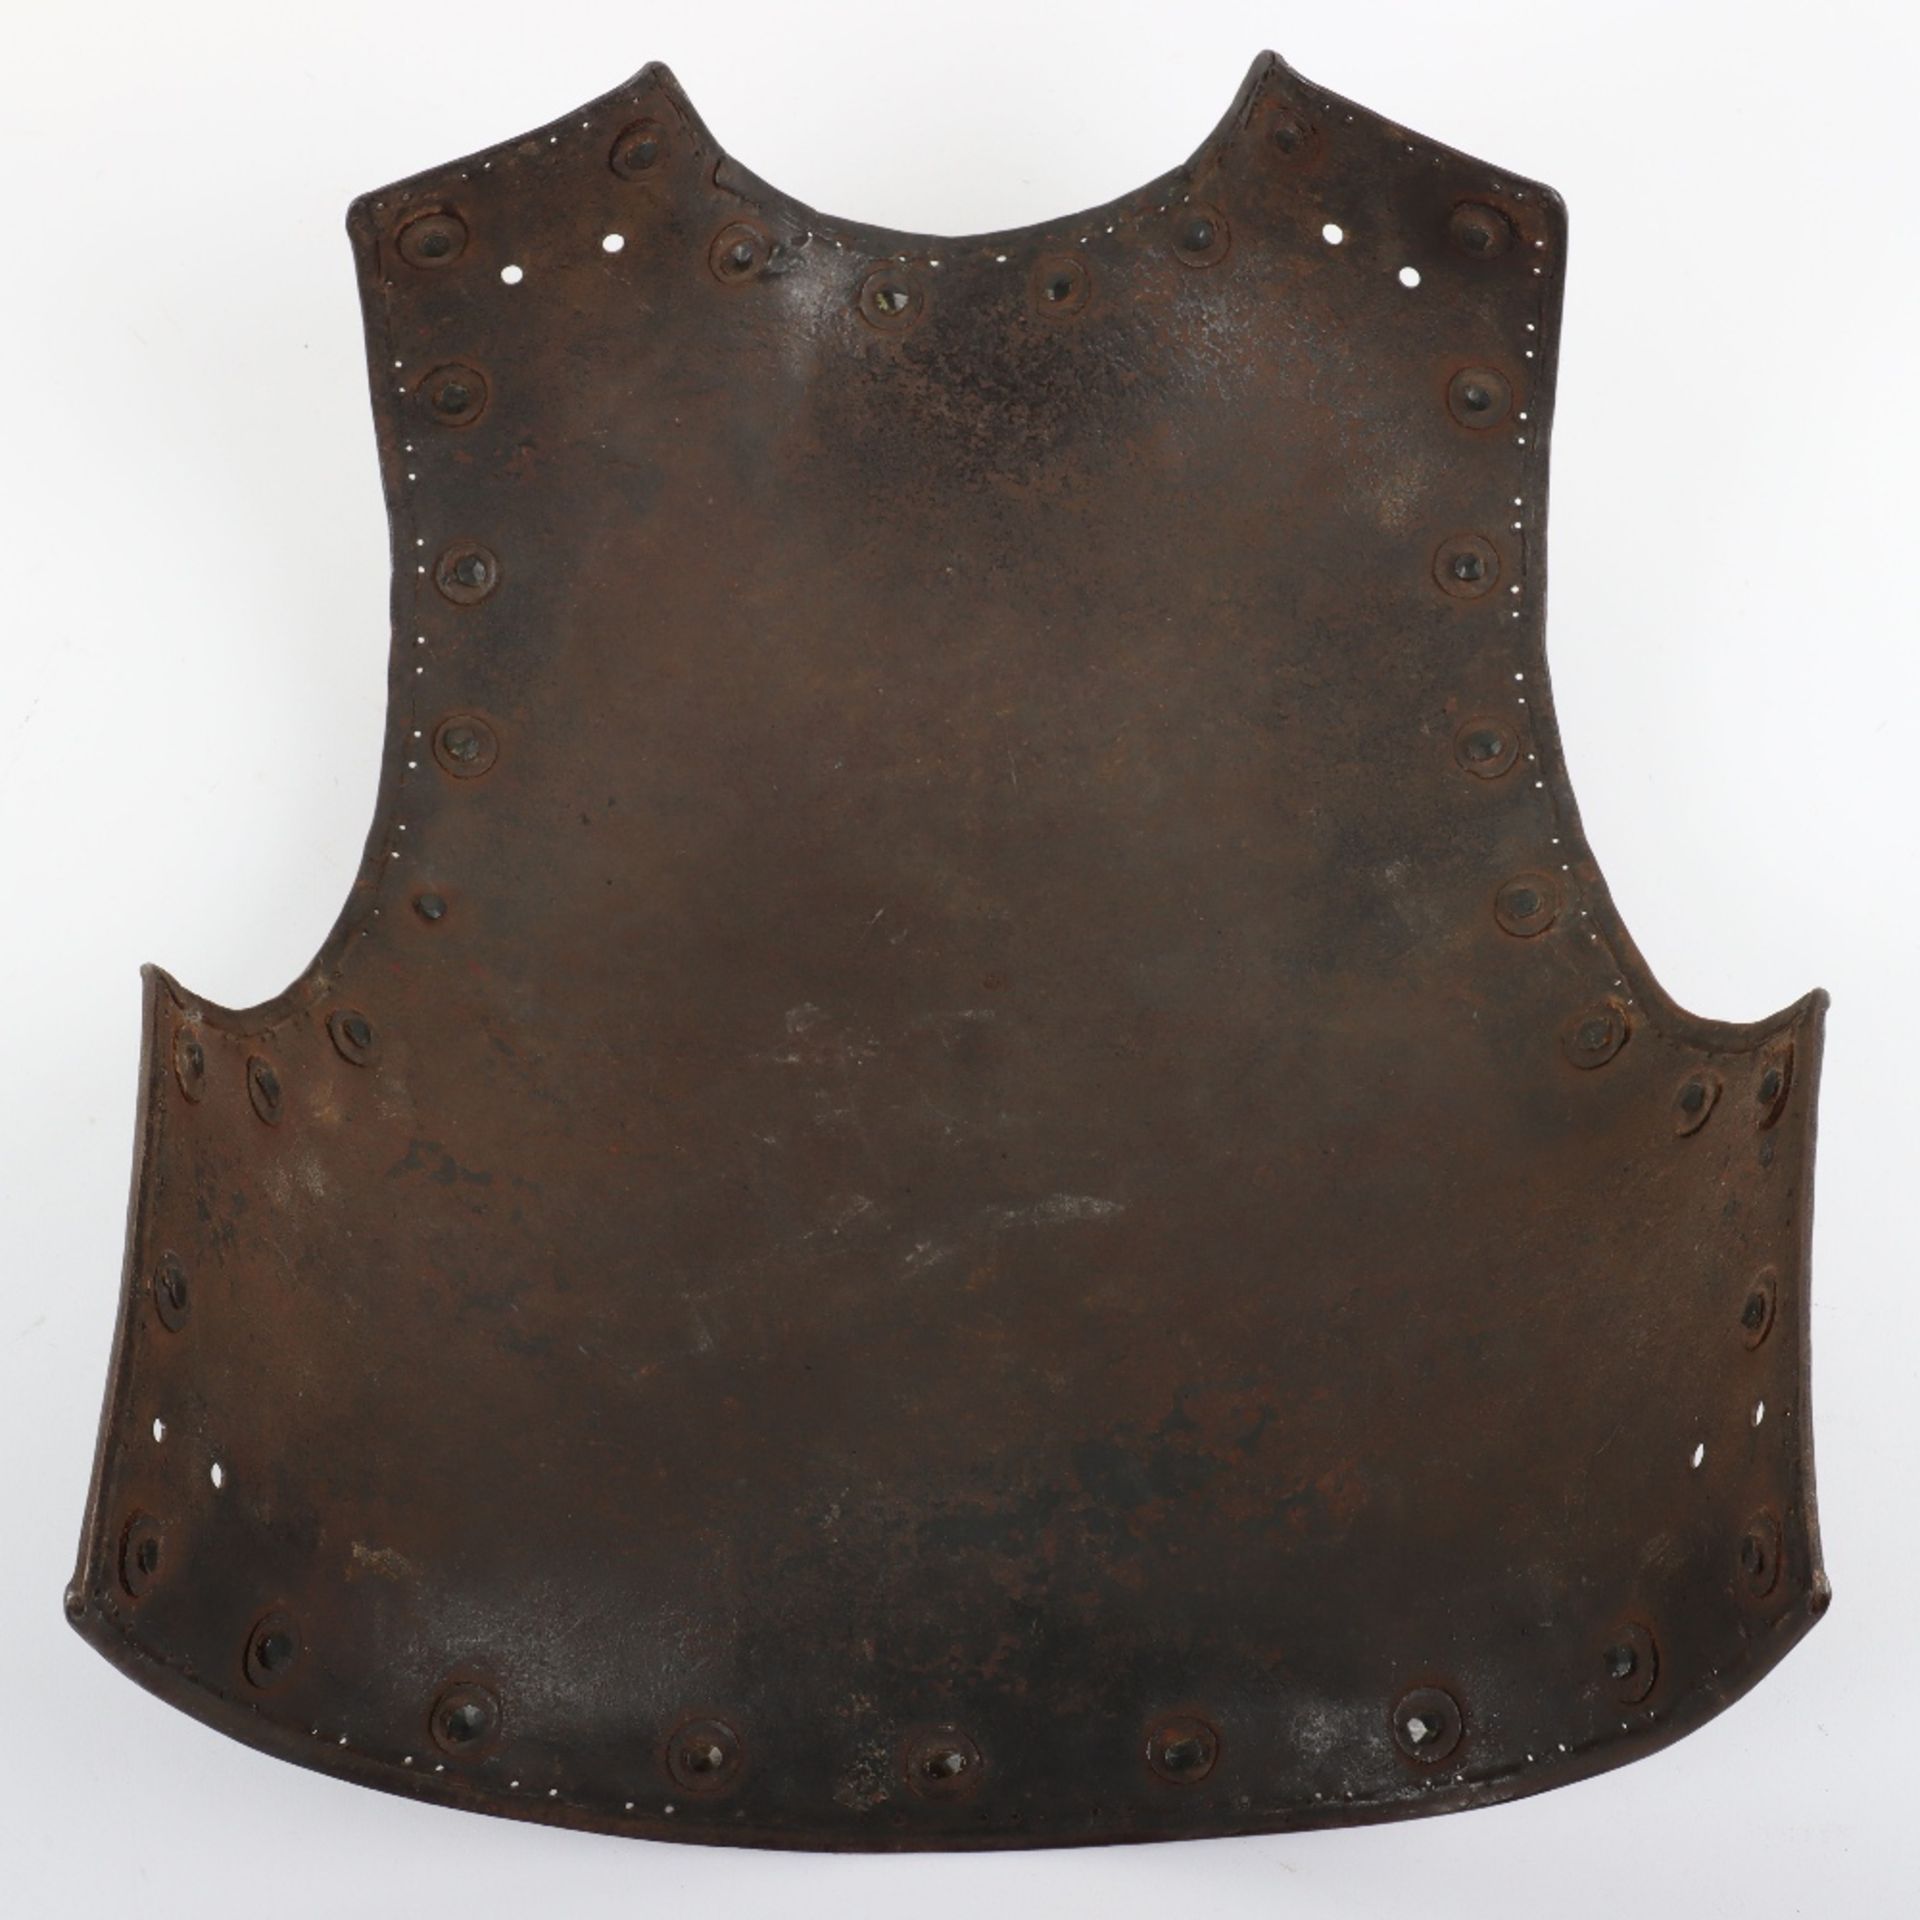 French 1st Empire Model 1804 Cavalry Troopers Backplate - Image 5 of 7